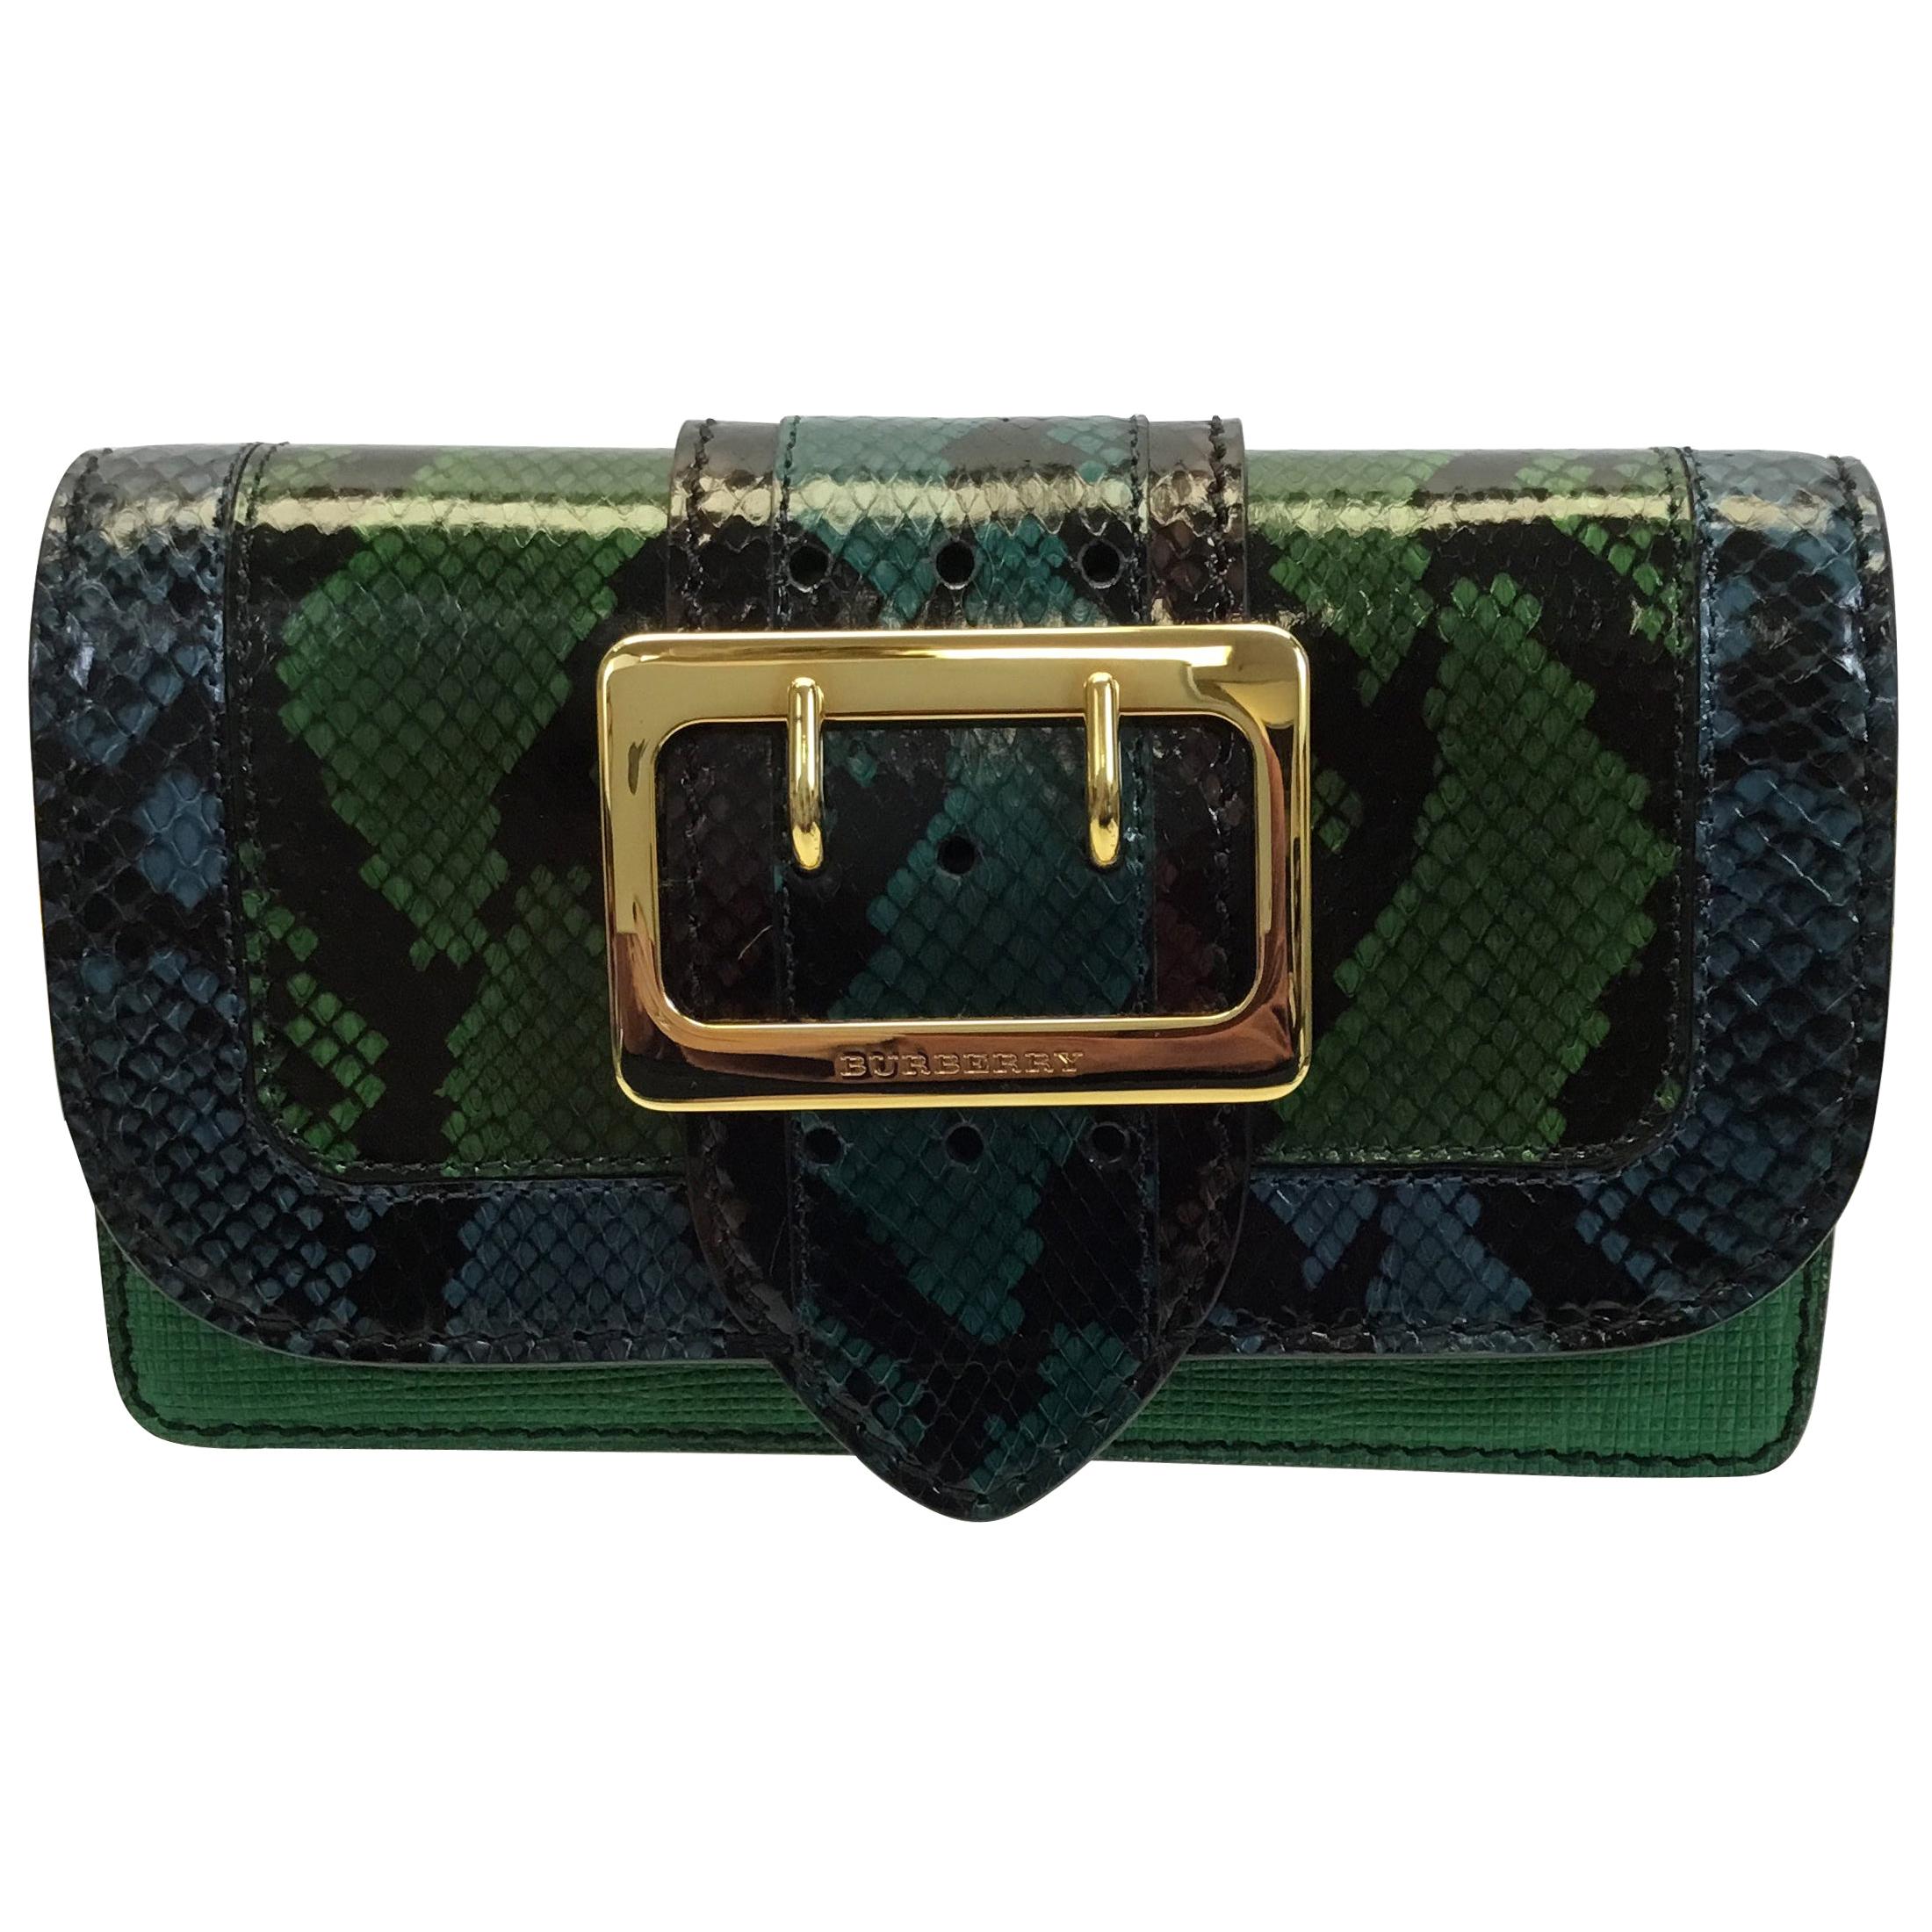 Burberry Limited Edition Snakeskin Bag with Two Straps NWT For Sale